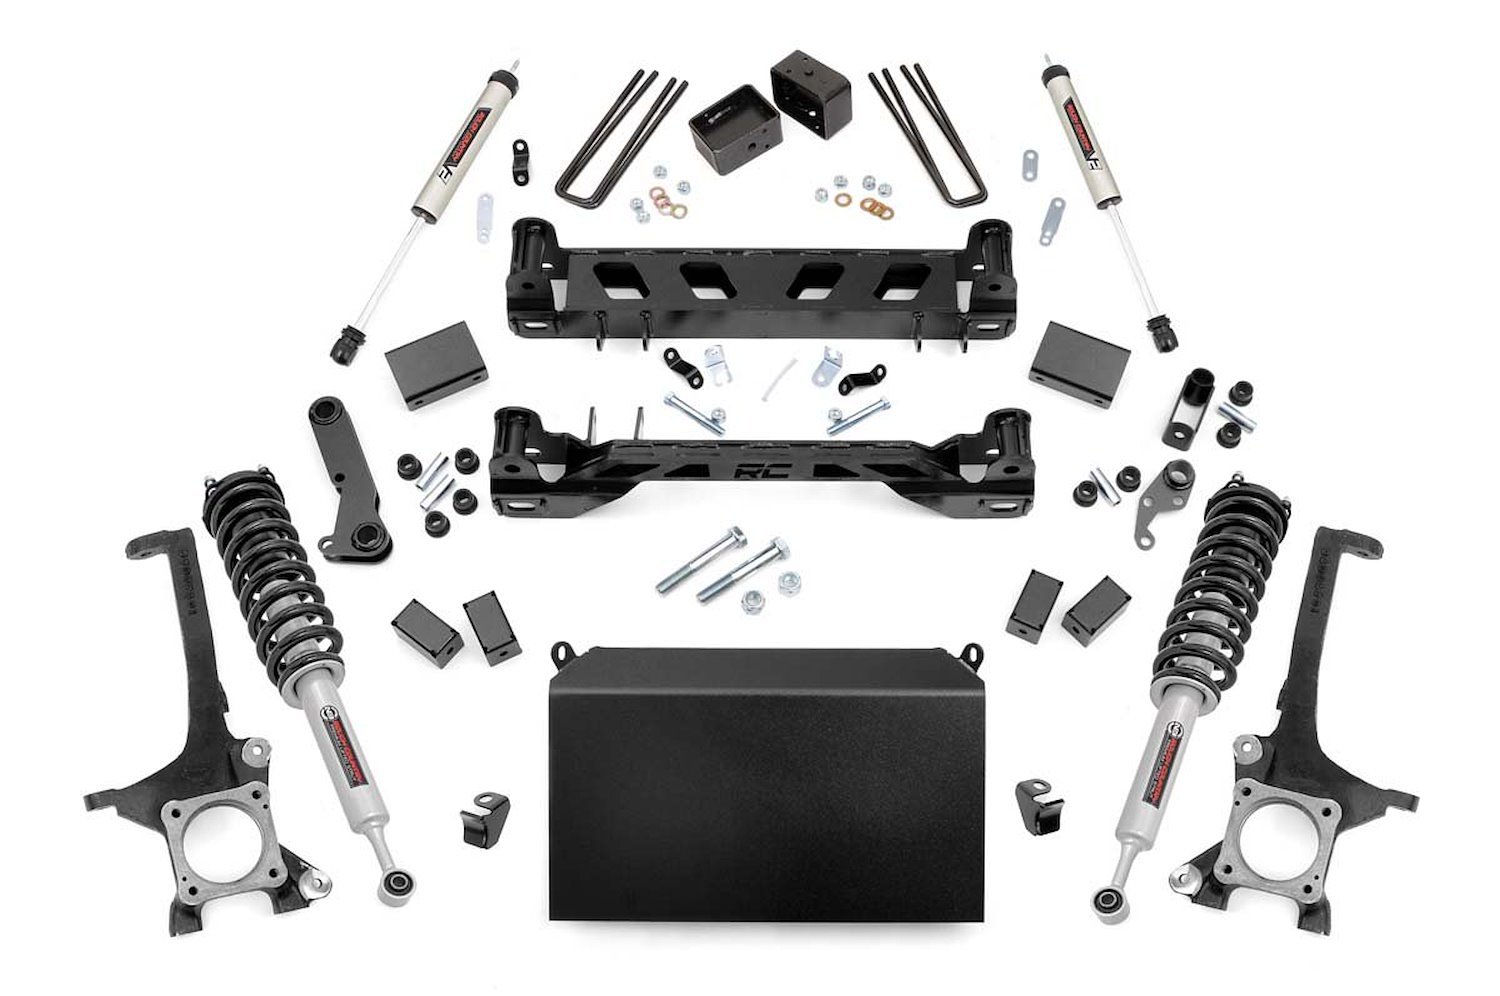 75271 6in Toyota Susp Lift Kit, Lifted N3 Struts and V2 Shcks (16-20 Tundra 2/4WD)